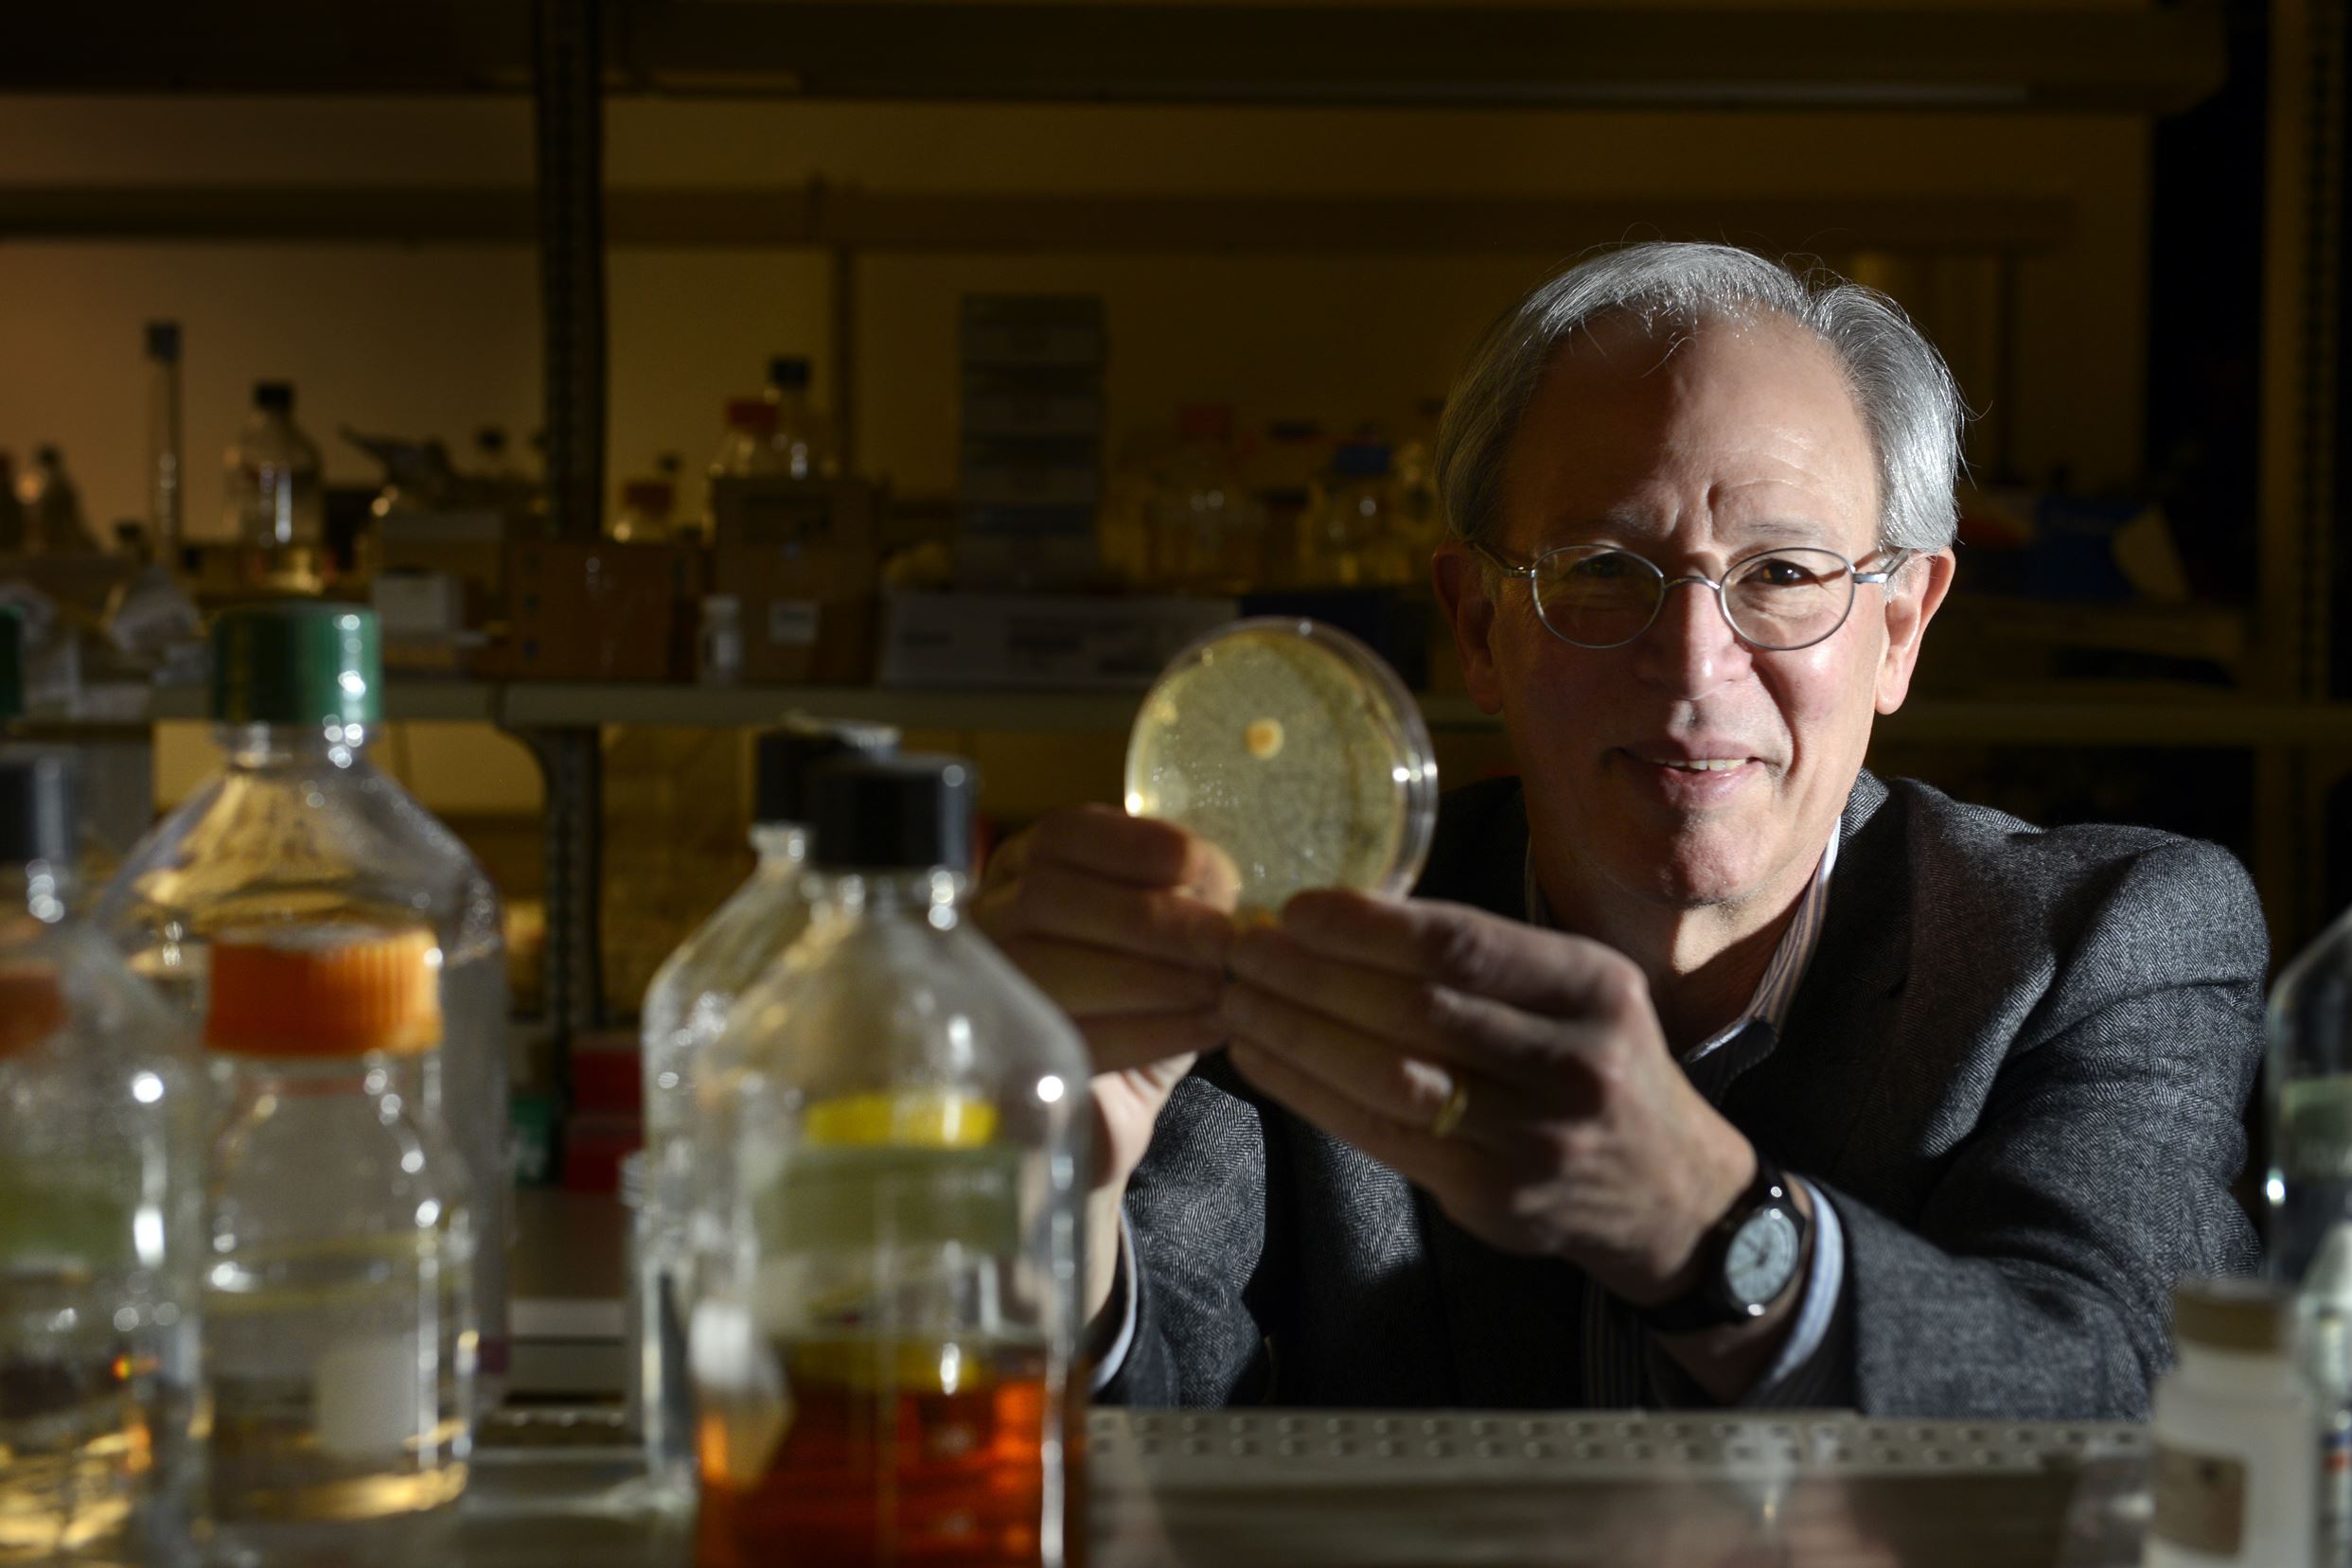 20150130bwSpectraLocal02-1 Jonathan W. Jarvik, a Carnegie Mellon University biochemist who also founded SpectraGenetics, holds a petri disc with a colony of cells used in his research to find a compound that boosts the newly discovered anti-aging protein, GDF11, to be used to reverse aging in pets.